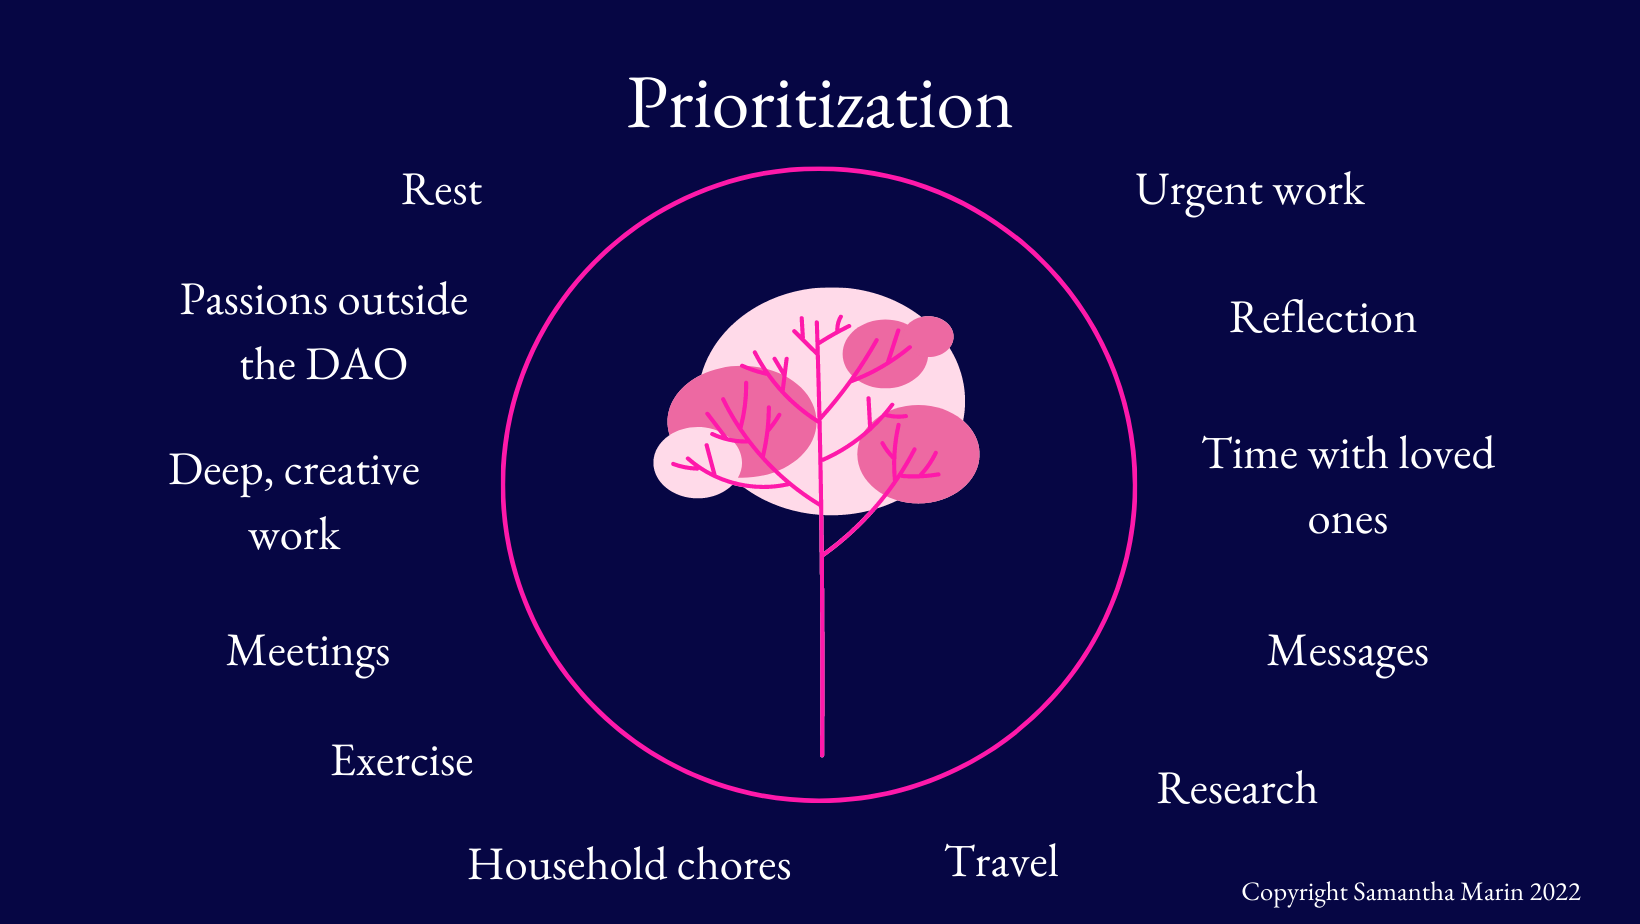 Prioritization isn't just about work, it's about your daily life, too.